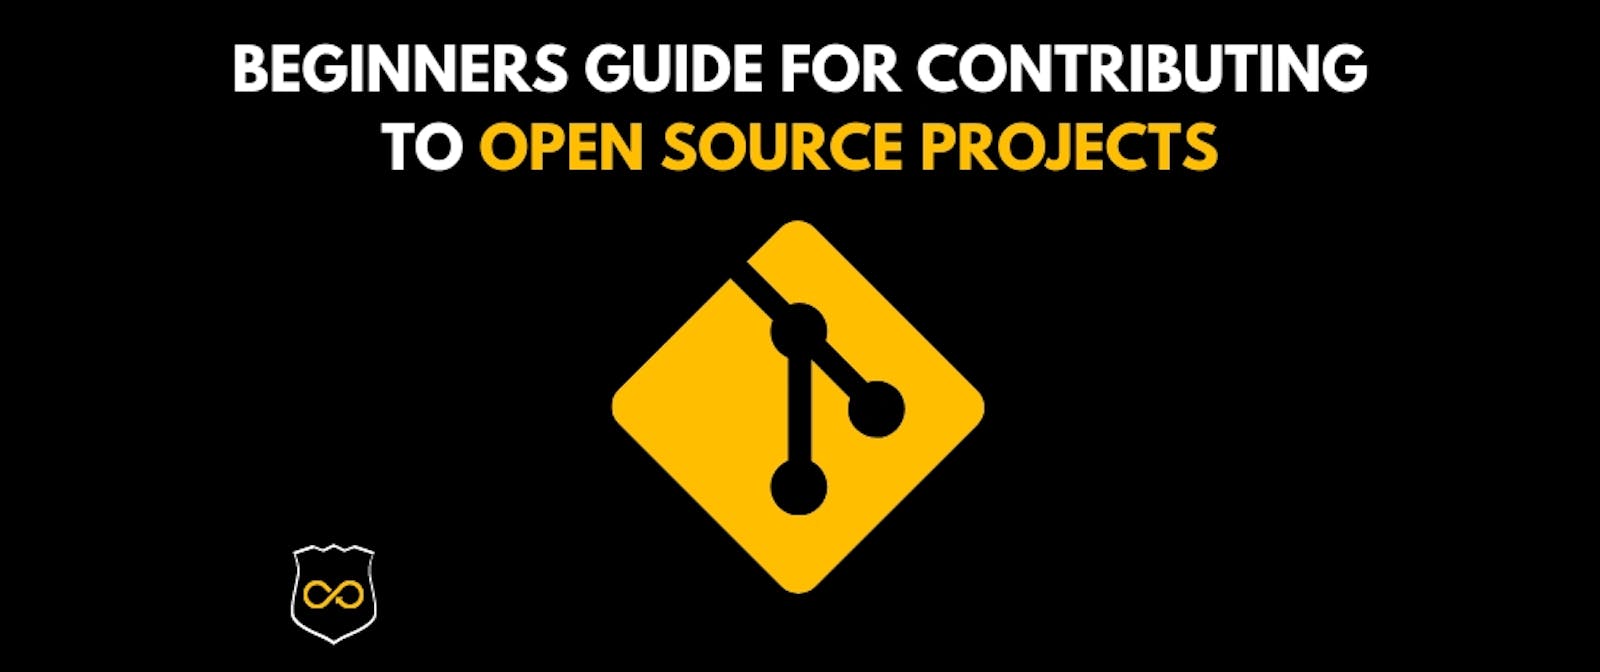 A Beginner's Guide to Contributing to Open Source Projects